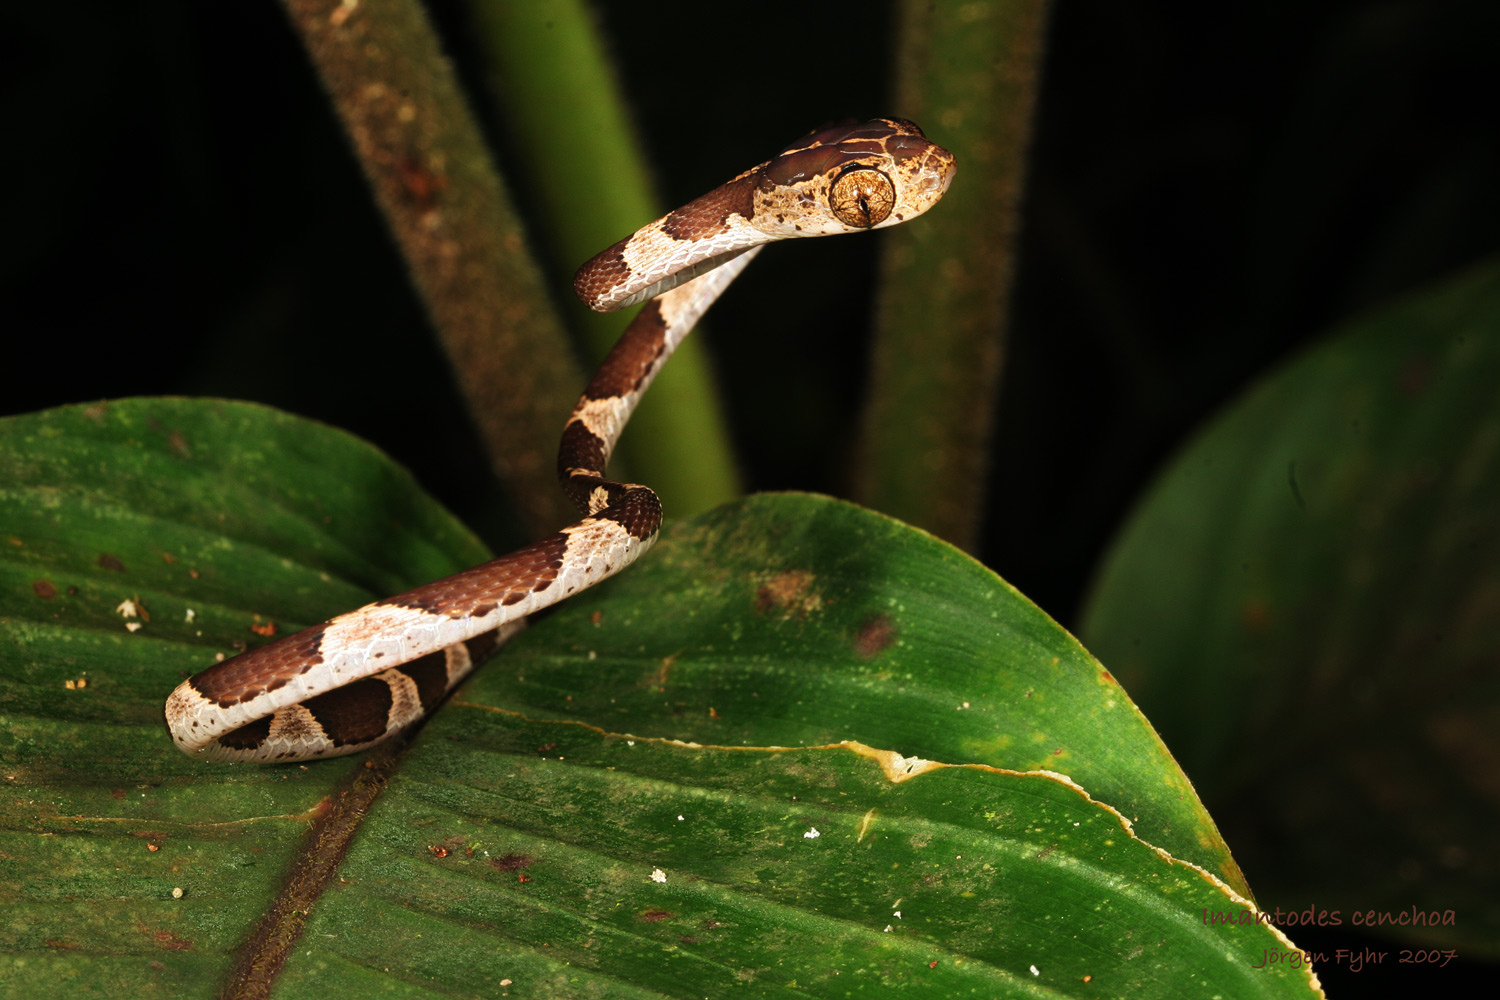 Neotropical snakes1500 x 1000